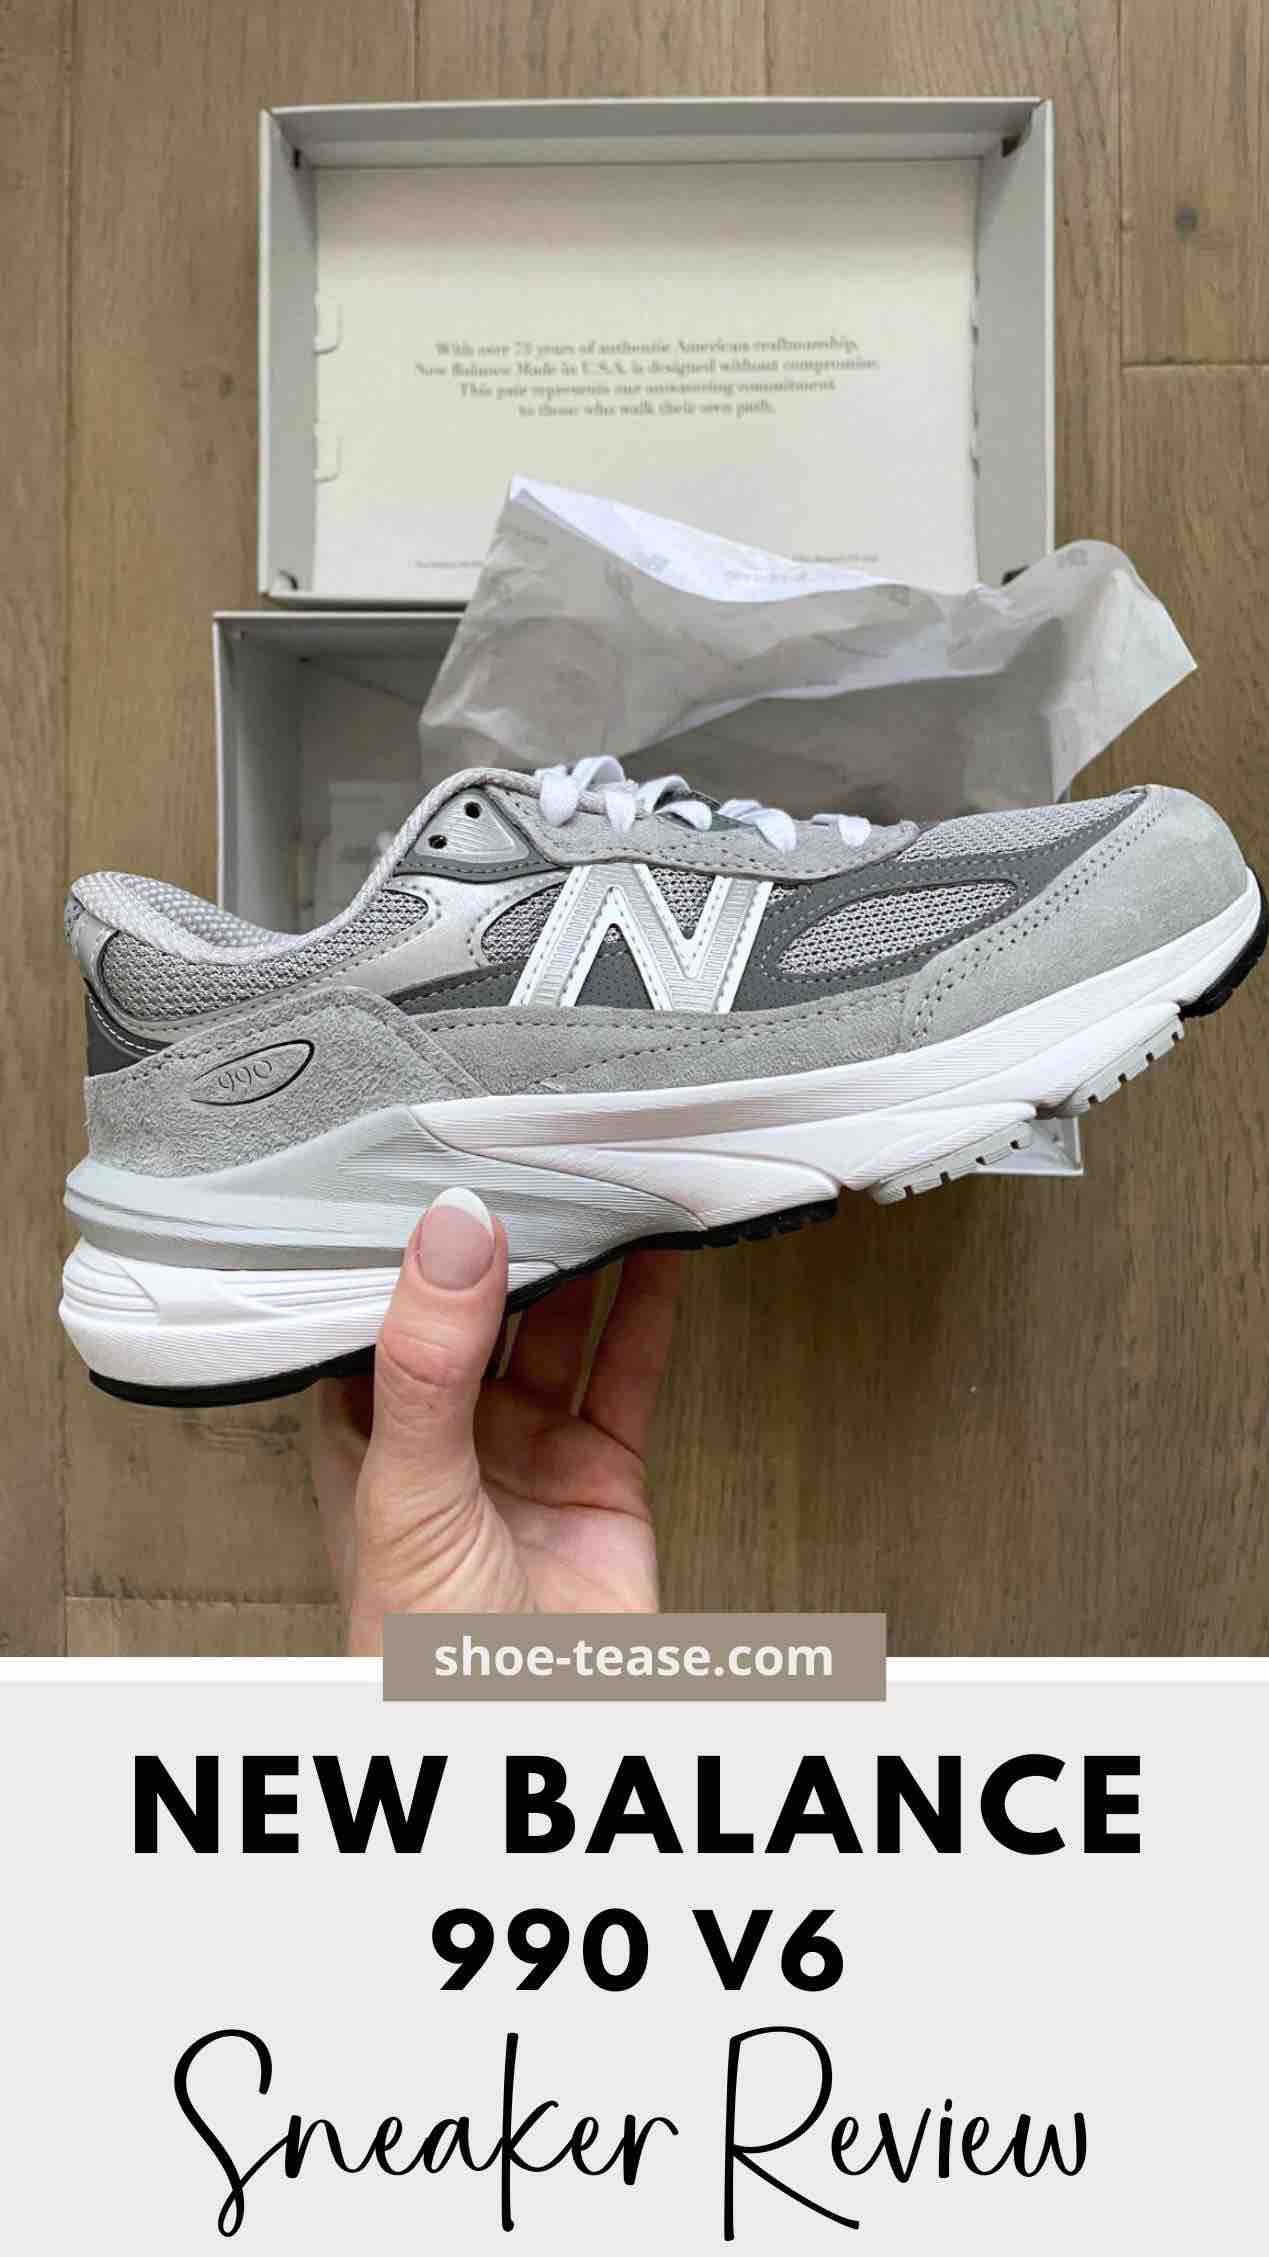 Close up of side view of grey and white New Balance 990 V6 with a hand unboxing the shoes over text reading new balance 990 V6 sneakers review.